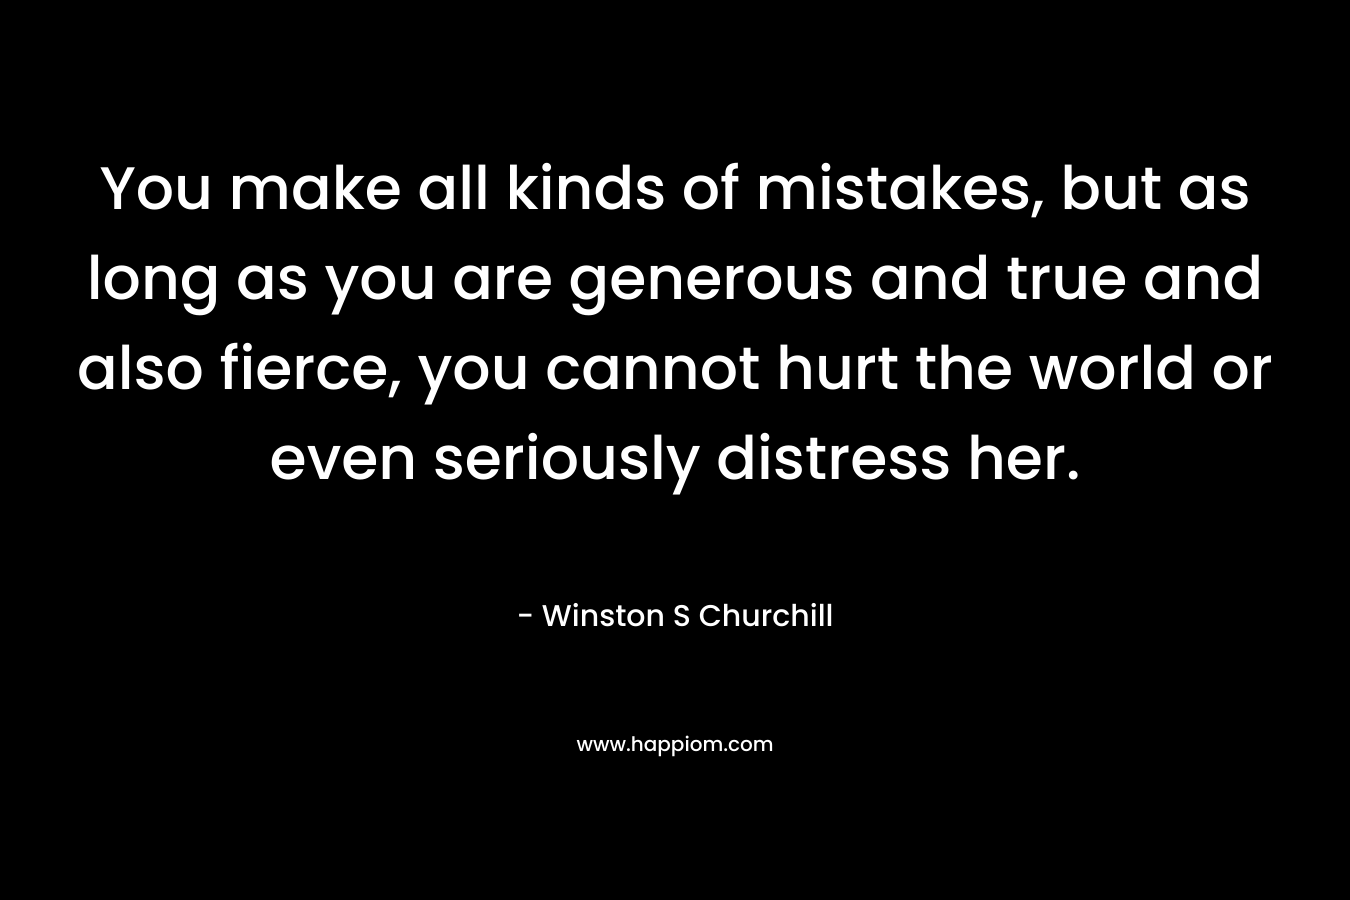 You make all kinds of mistakes, but as long as you are generous and true and also fierce, you cannot hurt the world or even seriously distress her.